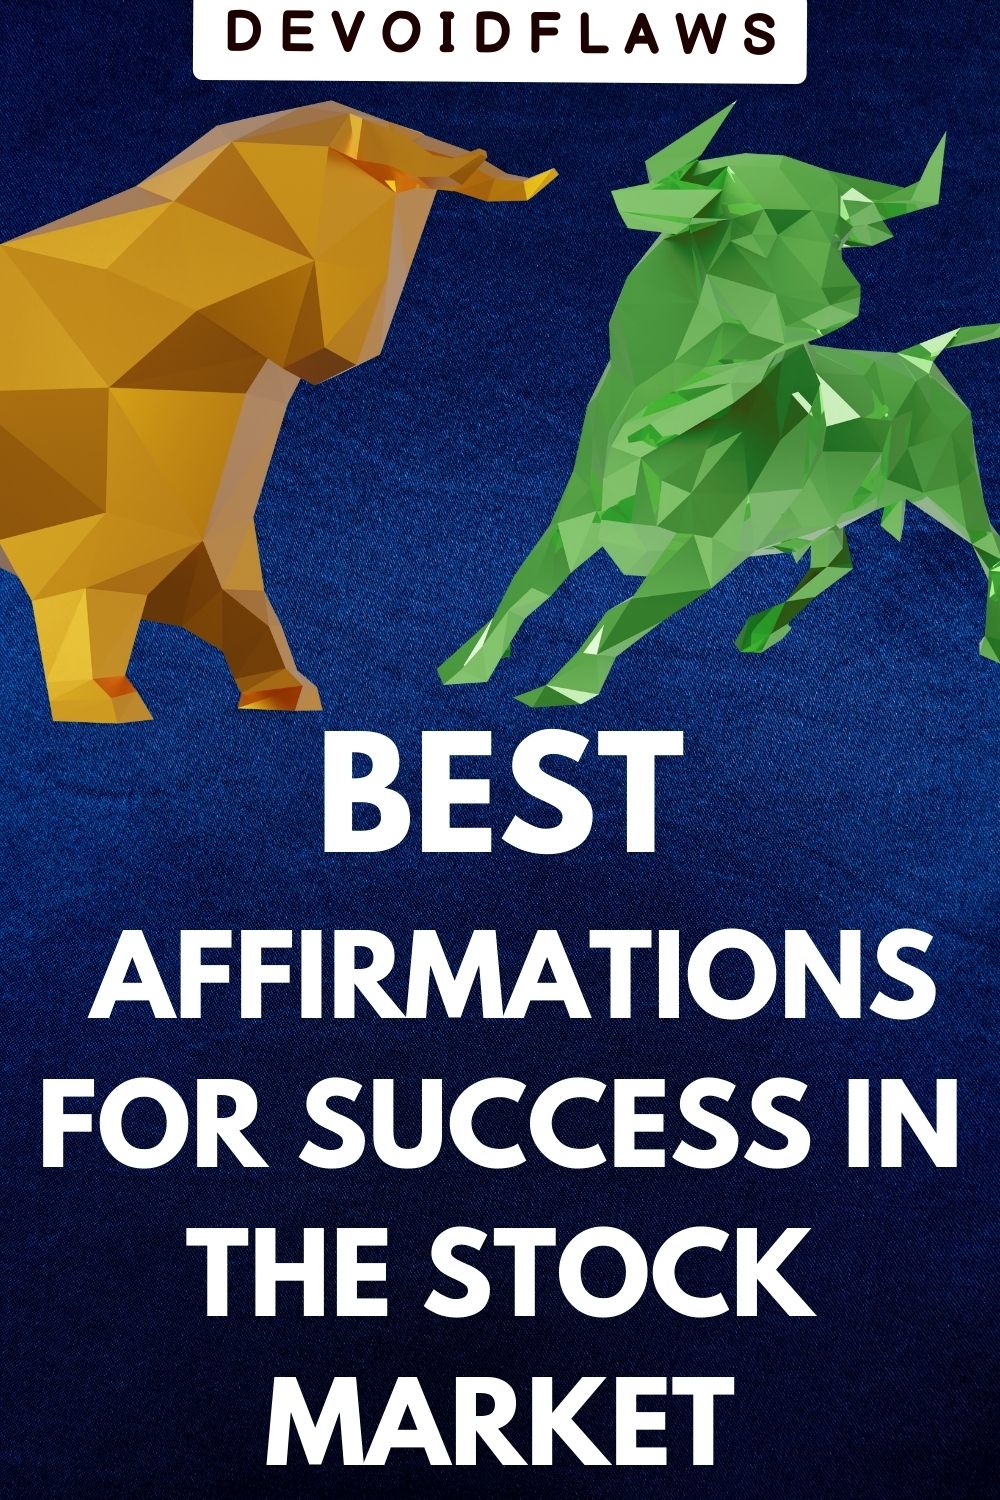 blue background image with text - best affirmations for success in the stock market